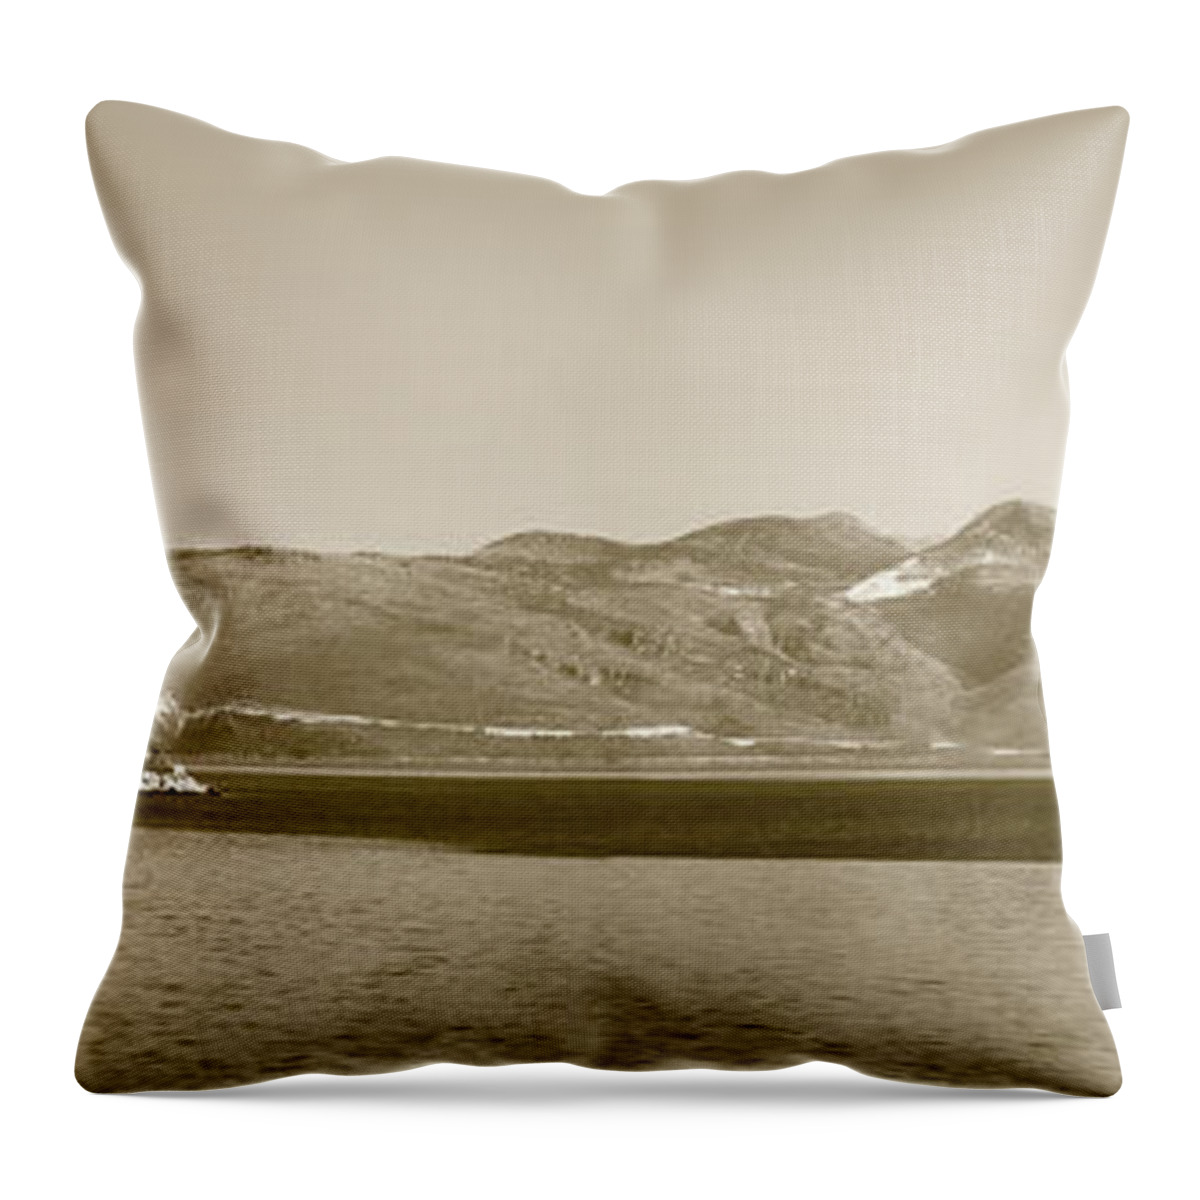  Croatia Throw Pillow featuring the photograph Sailing Ship In The Adriatic Islands in Sepia by Weston Westmoreland